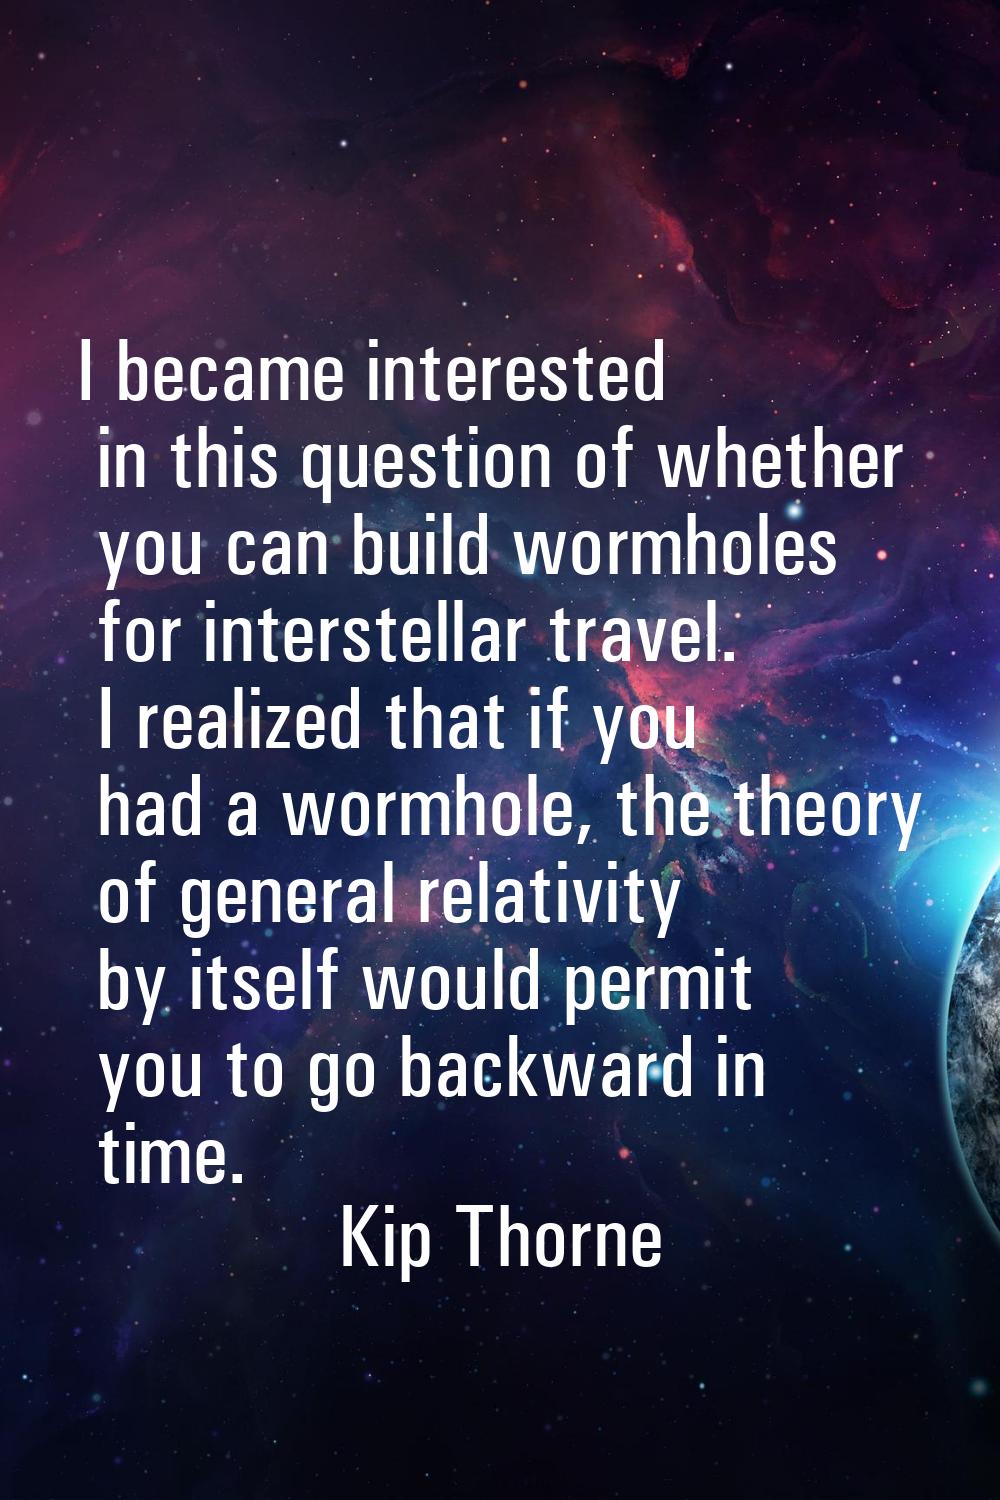 I became interested in this question of whether you can build wormholes for interstellar travel. I 